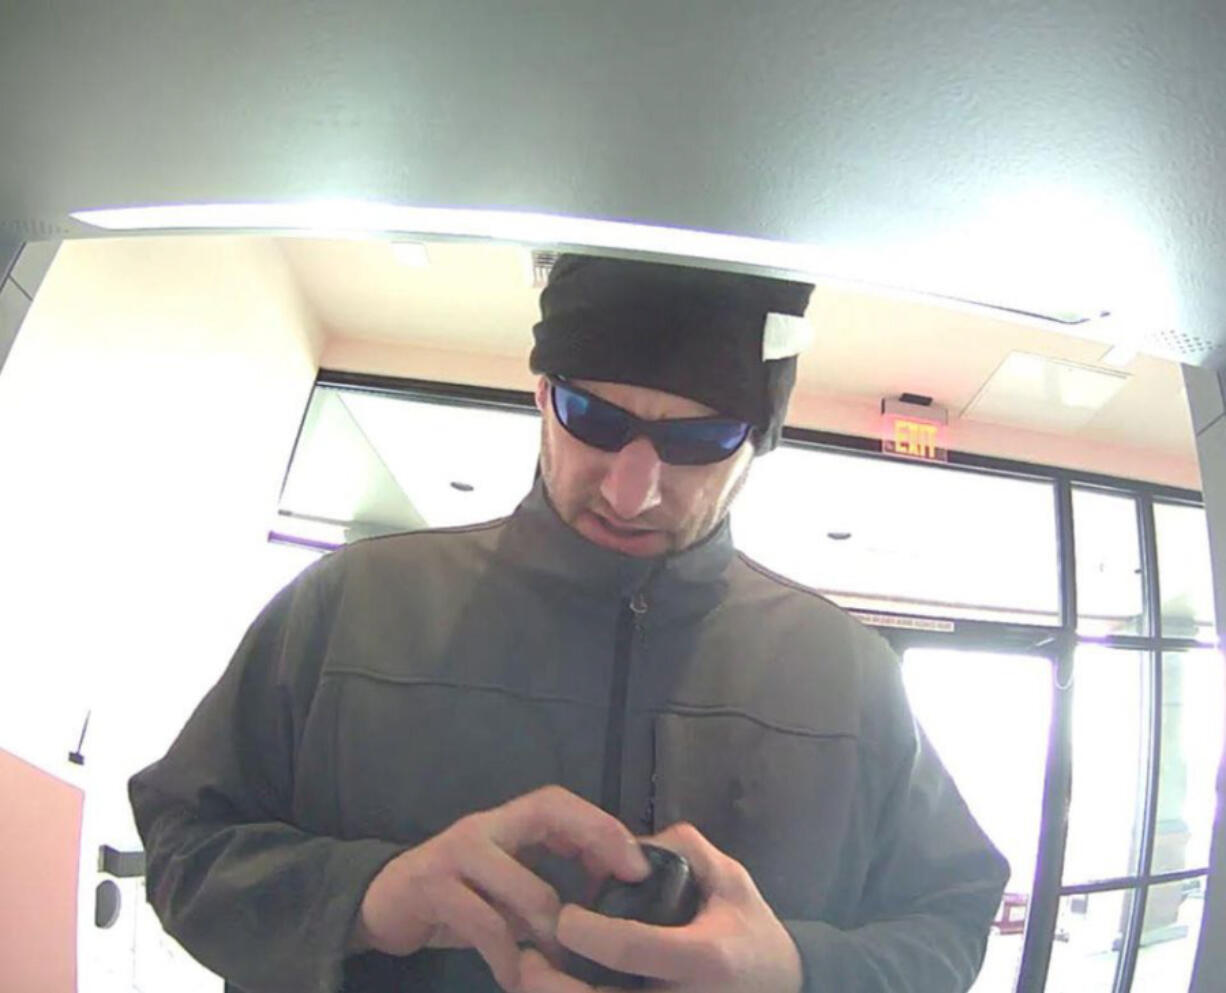 Clark County sheriff's deputies are seeking the public's help identifying a man who's a person of interest in the theft of a debit card.